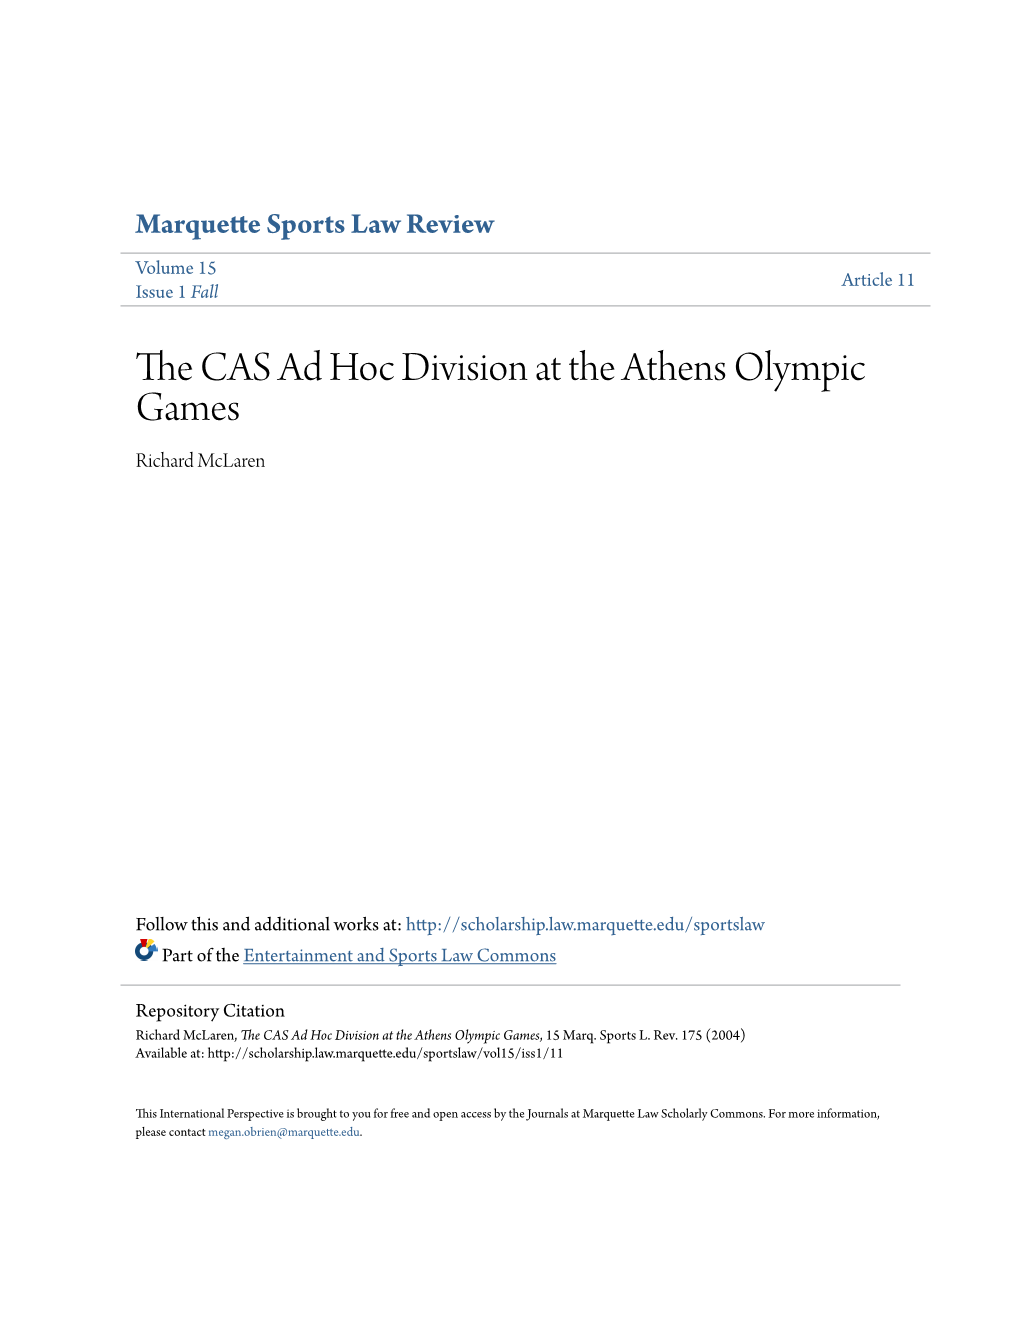 The CAS Ad Hoc Division at the Athens Olympic Games Richard Mclaren